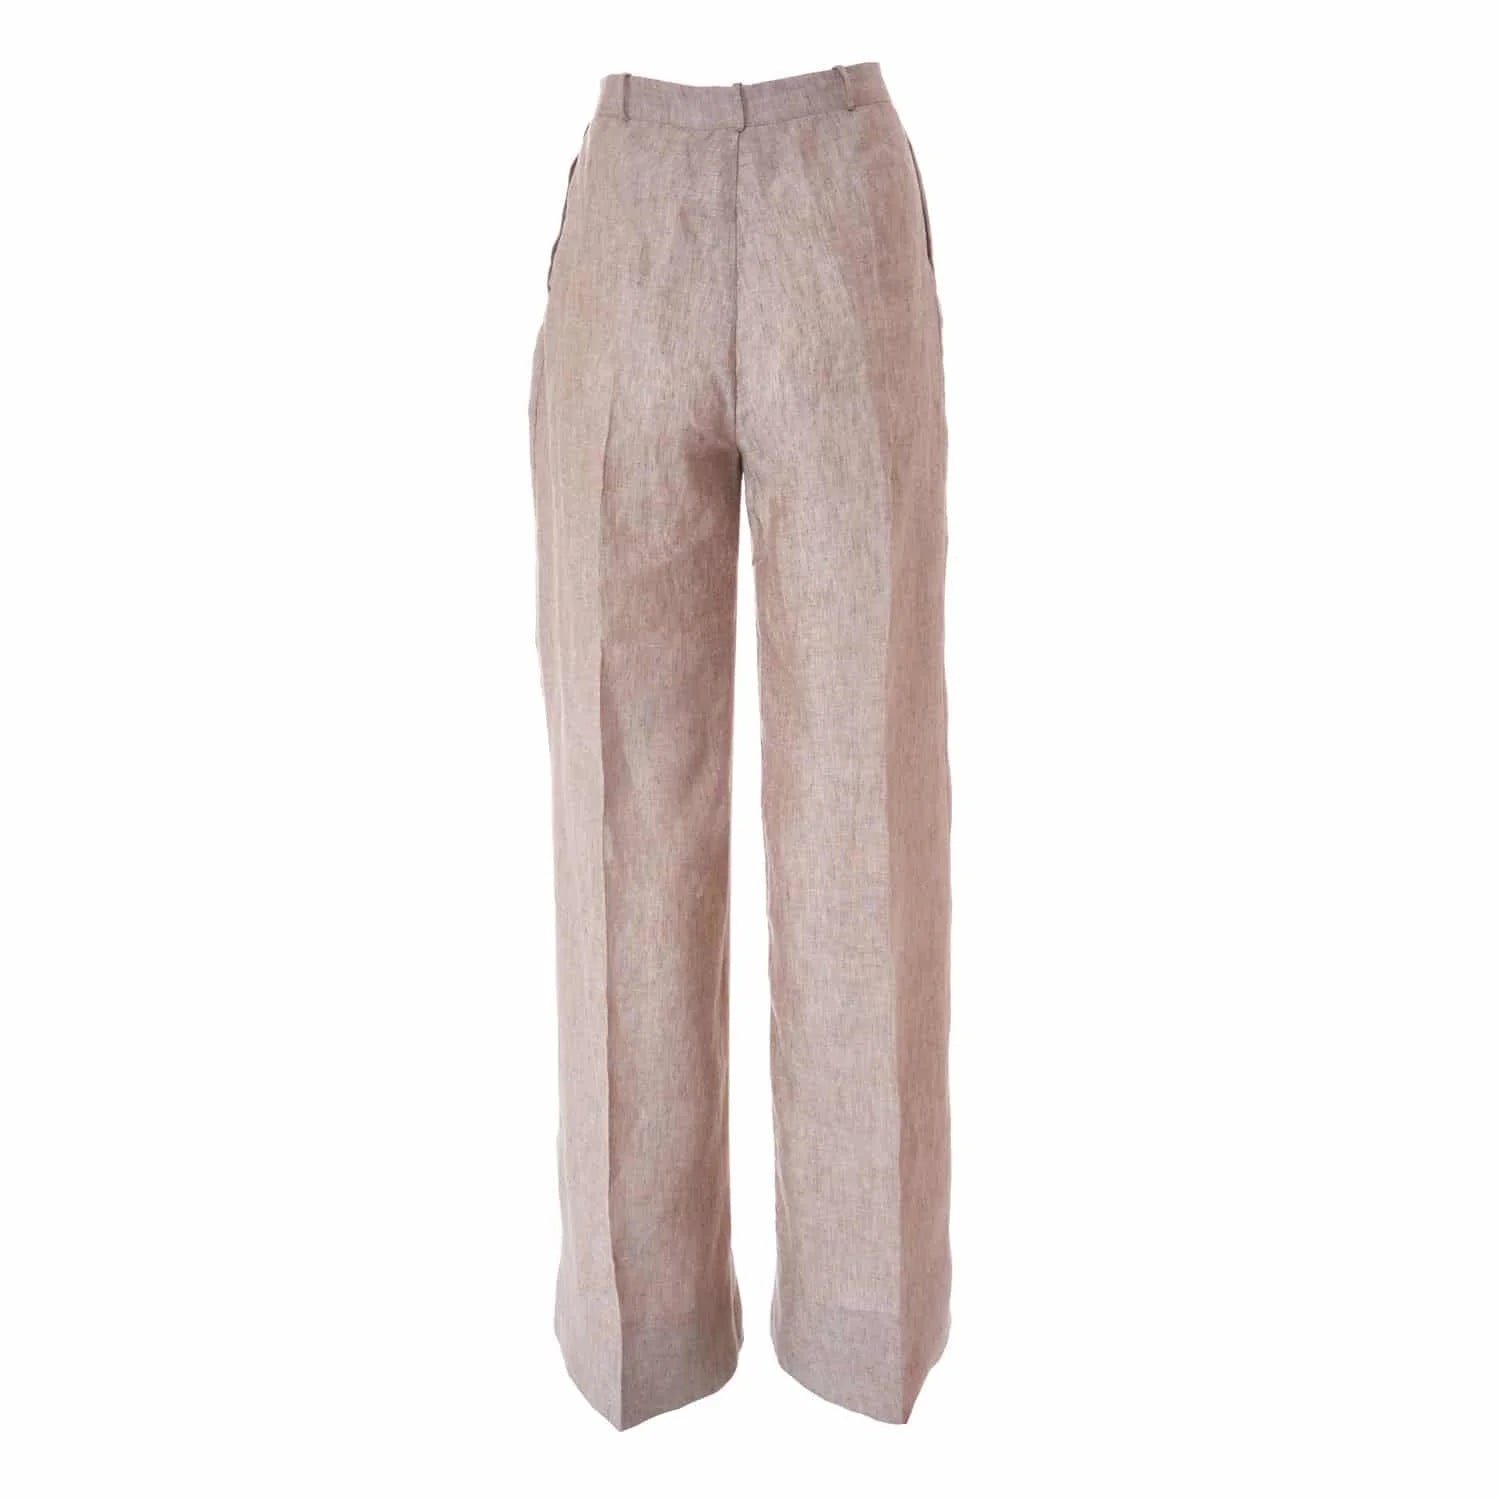 Linen trousers - Trousers